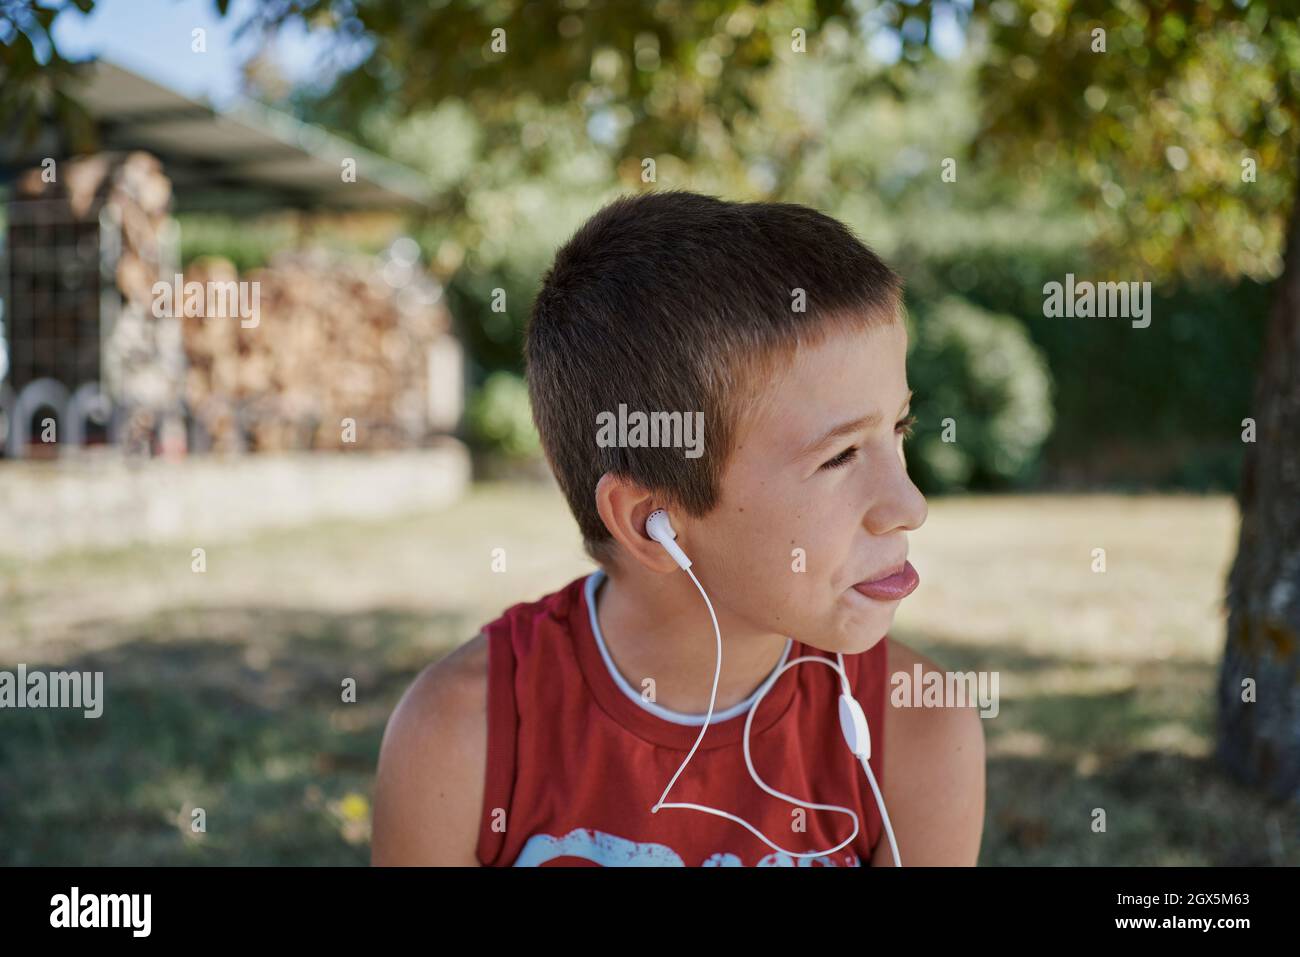 A cute boy listen to music while he looks away under s tree-shade. A Spanish boy uses his white earphones to listen music. Stock Photo